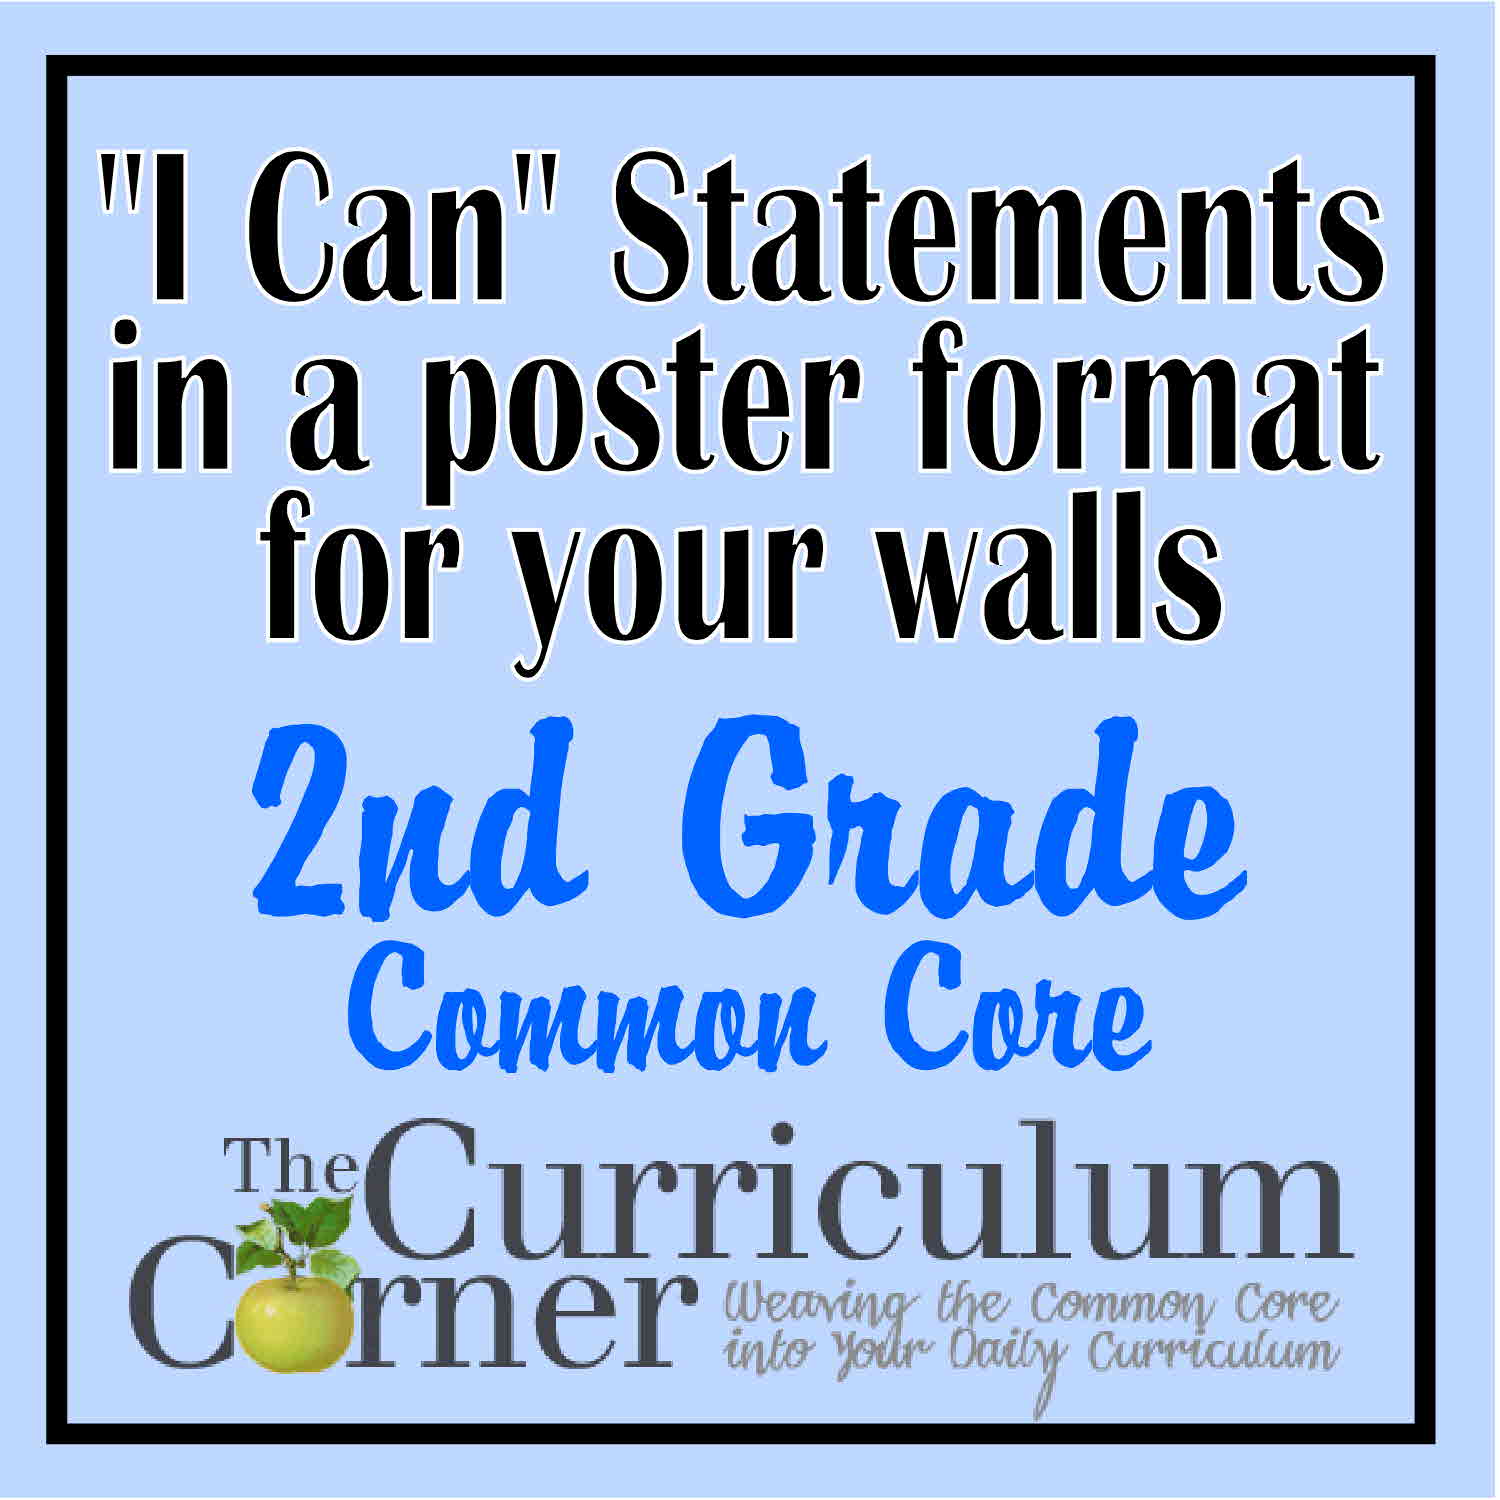 2nd-grade-i-can-standards-in-a-poster-format-the-curriculum-corner-123